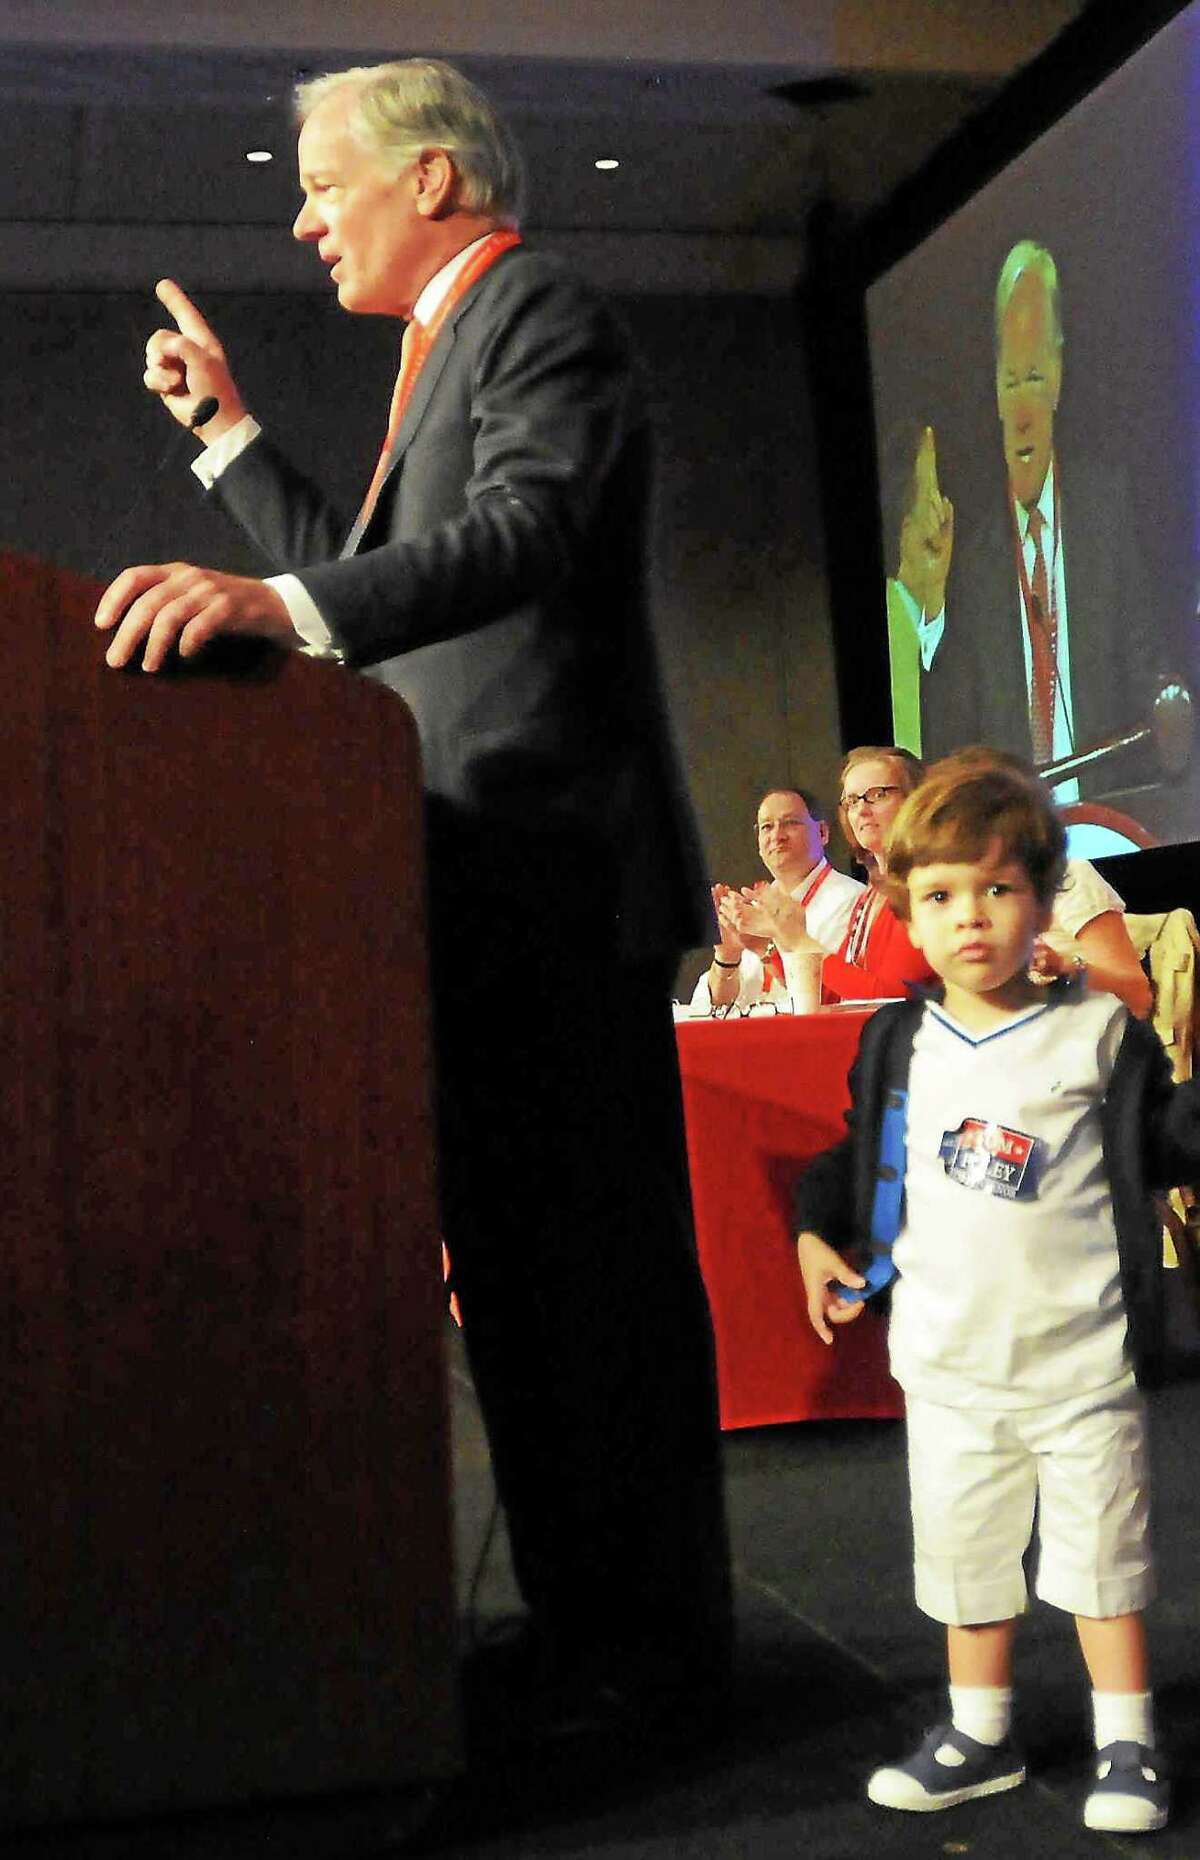 Tom Foley speaks during the 2014 Connecticut Republican State Convention at the Mohegan Sun Convention Center in Uncasville.